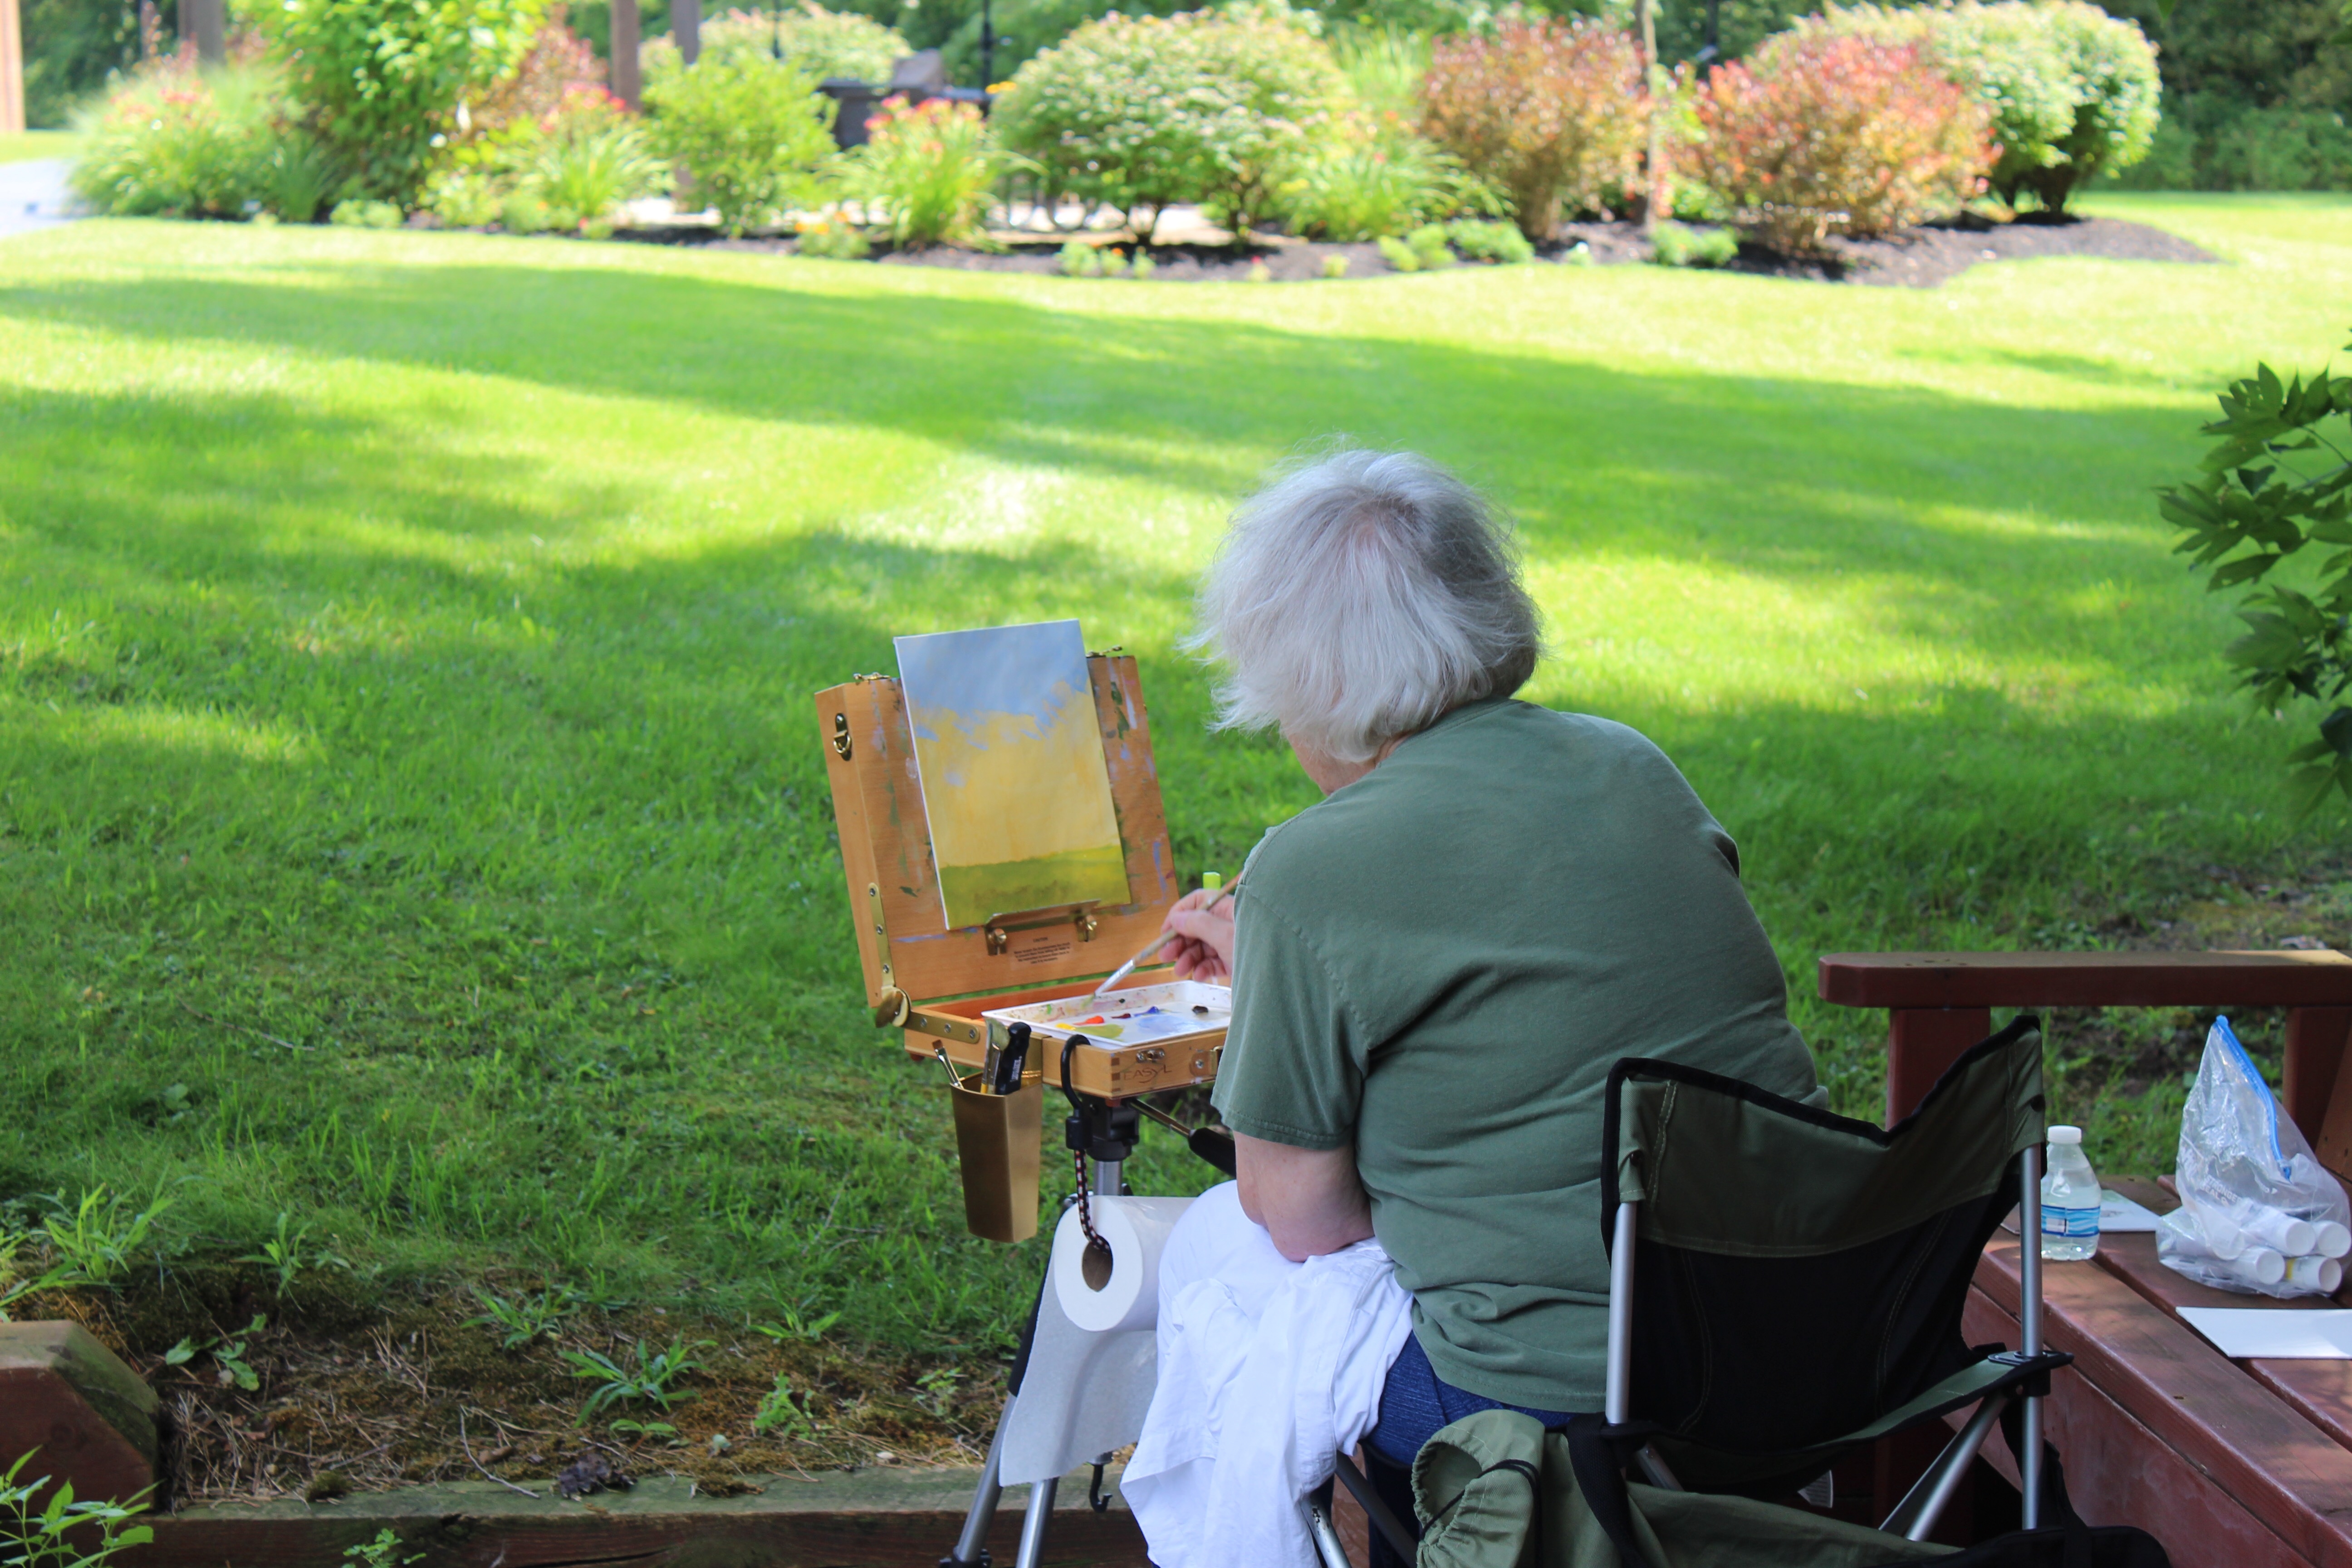 Acrylic Artists get in some fresh air and painting at Orion Library